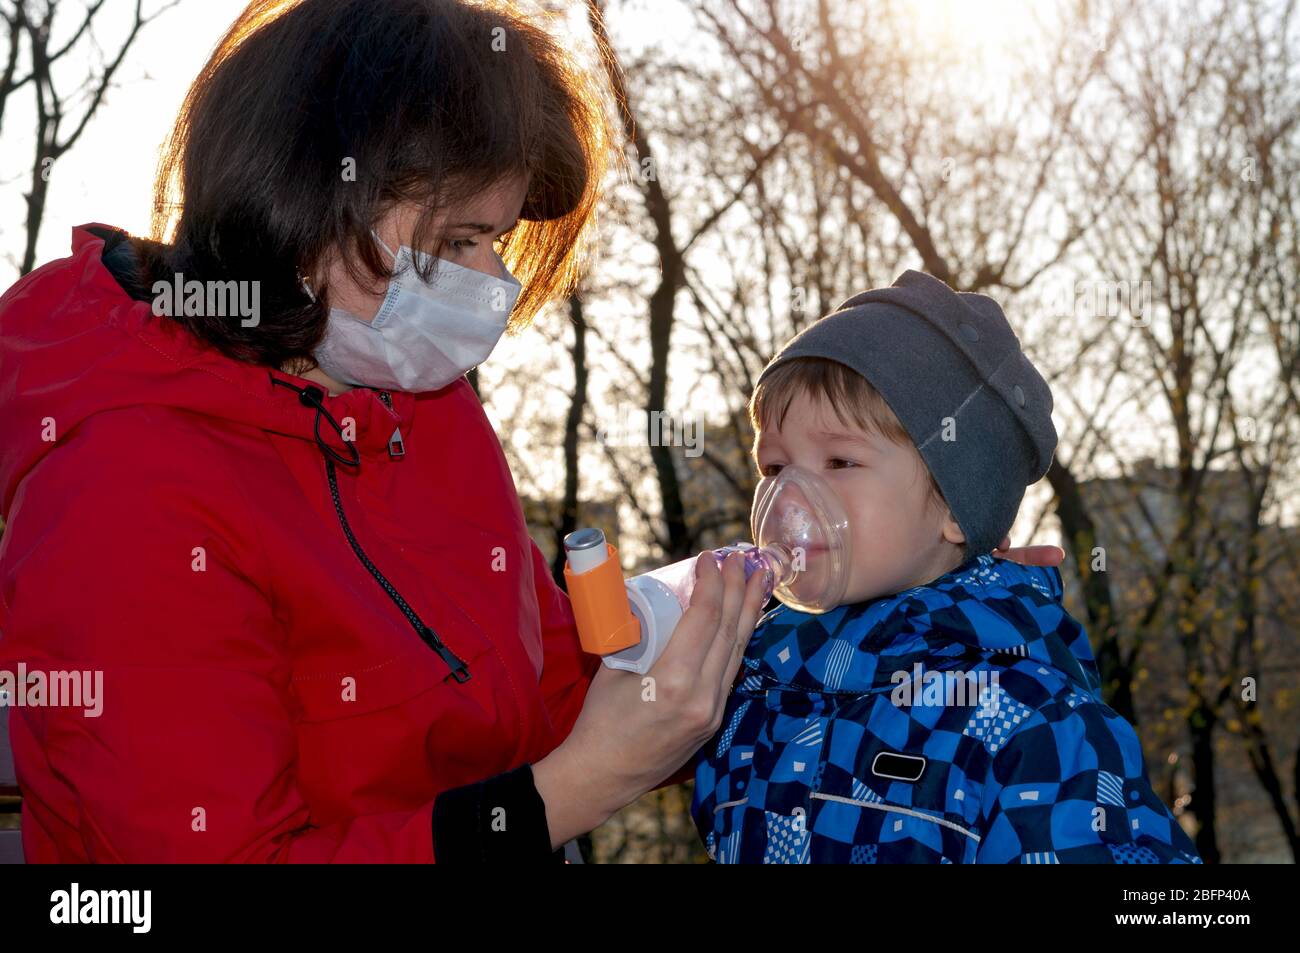 A small boy with illness bronchial asthma getting treatment with aerosol inhaler from his mama outdoors Stock Photo